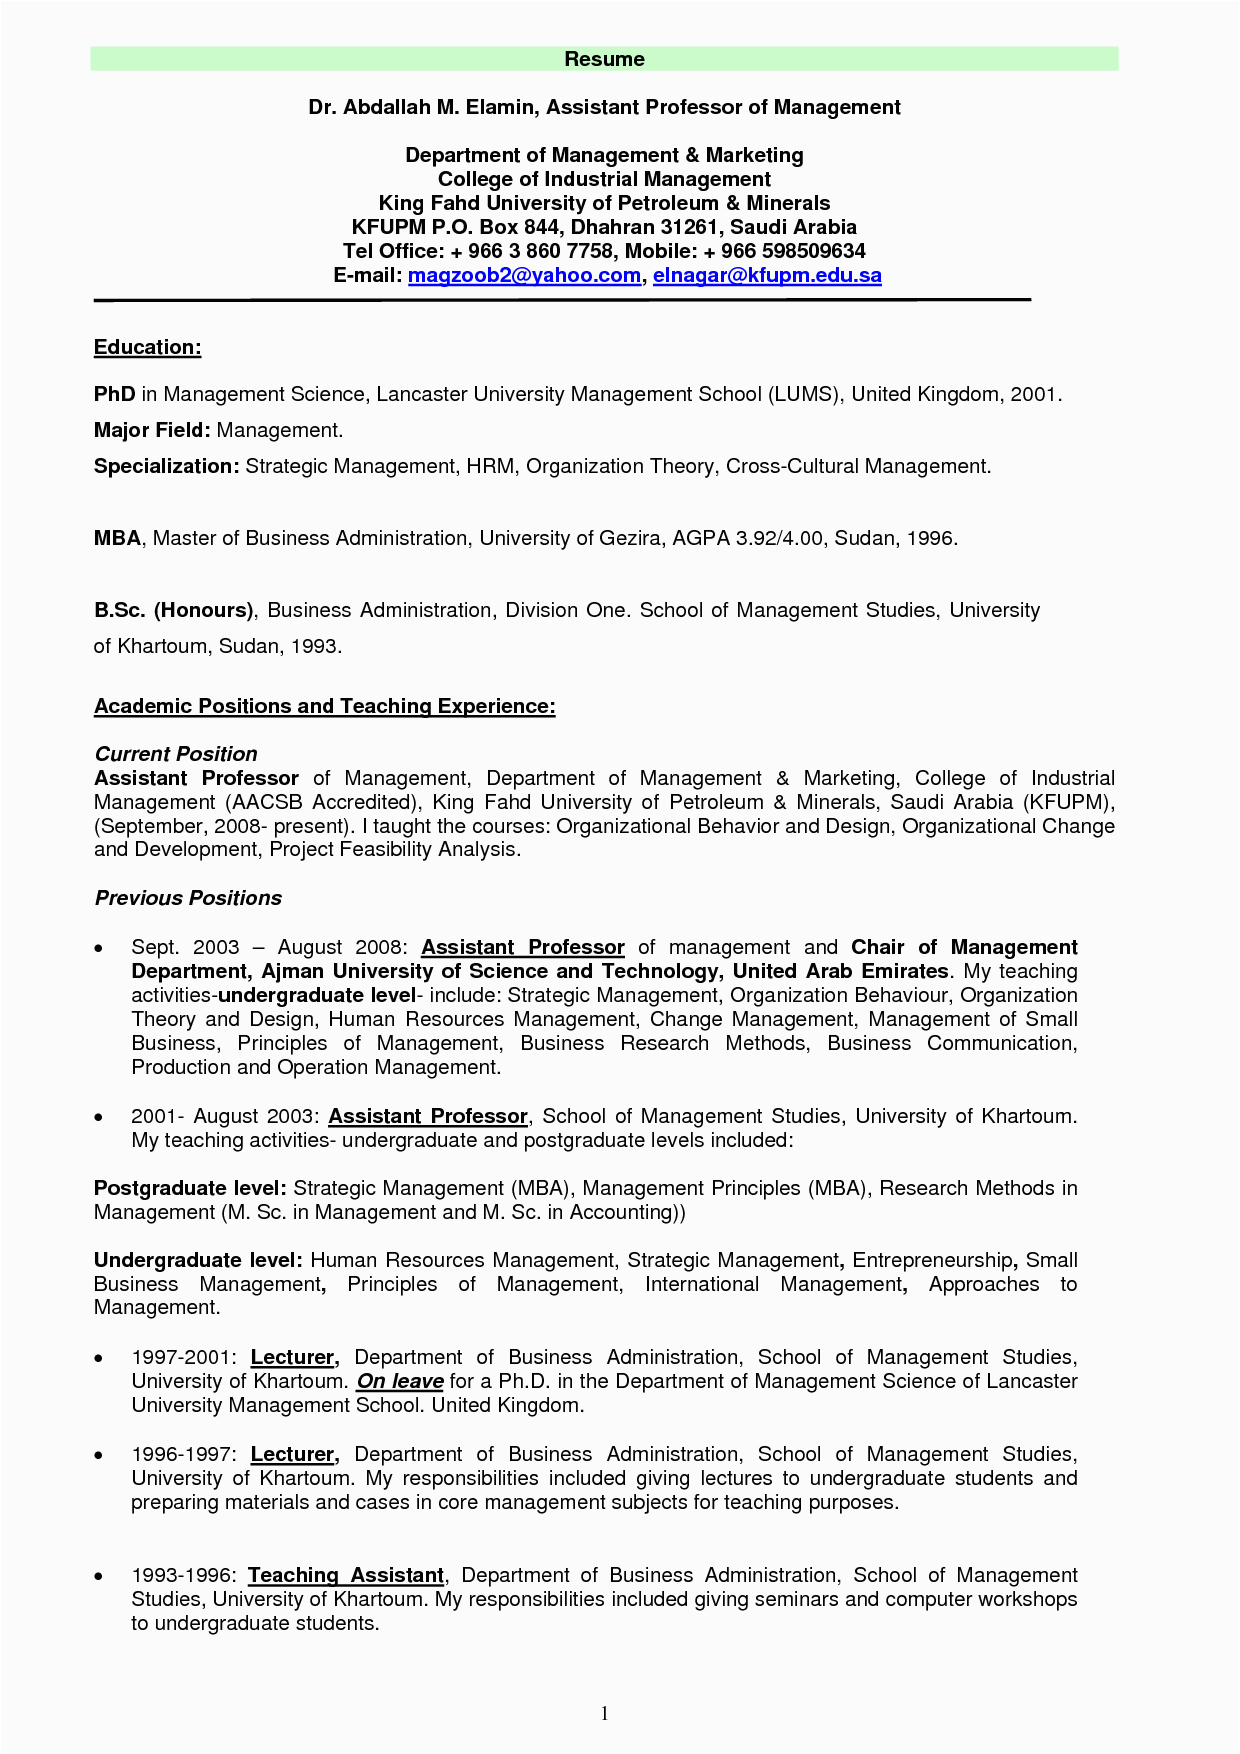 Resume Template for assistant Professor In Engineering College Professor Resume Template